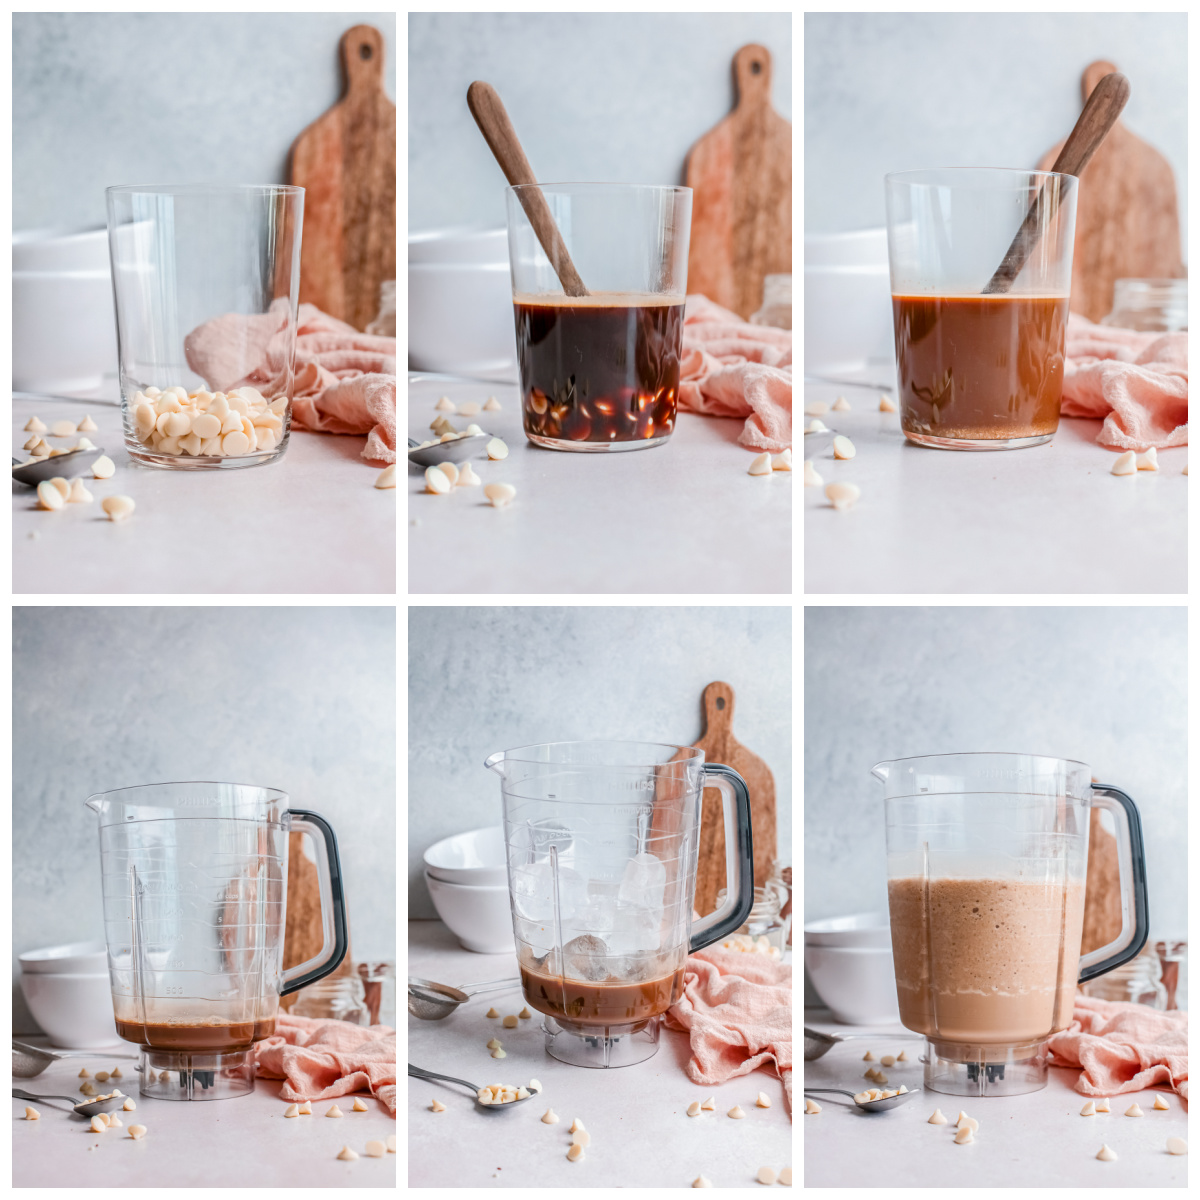 Step by step photos on how to make a White Chocolate Mocha Frappuccino.